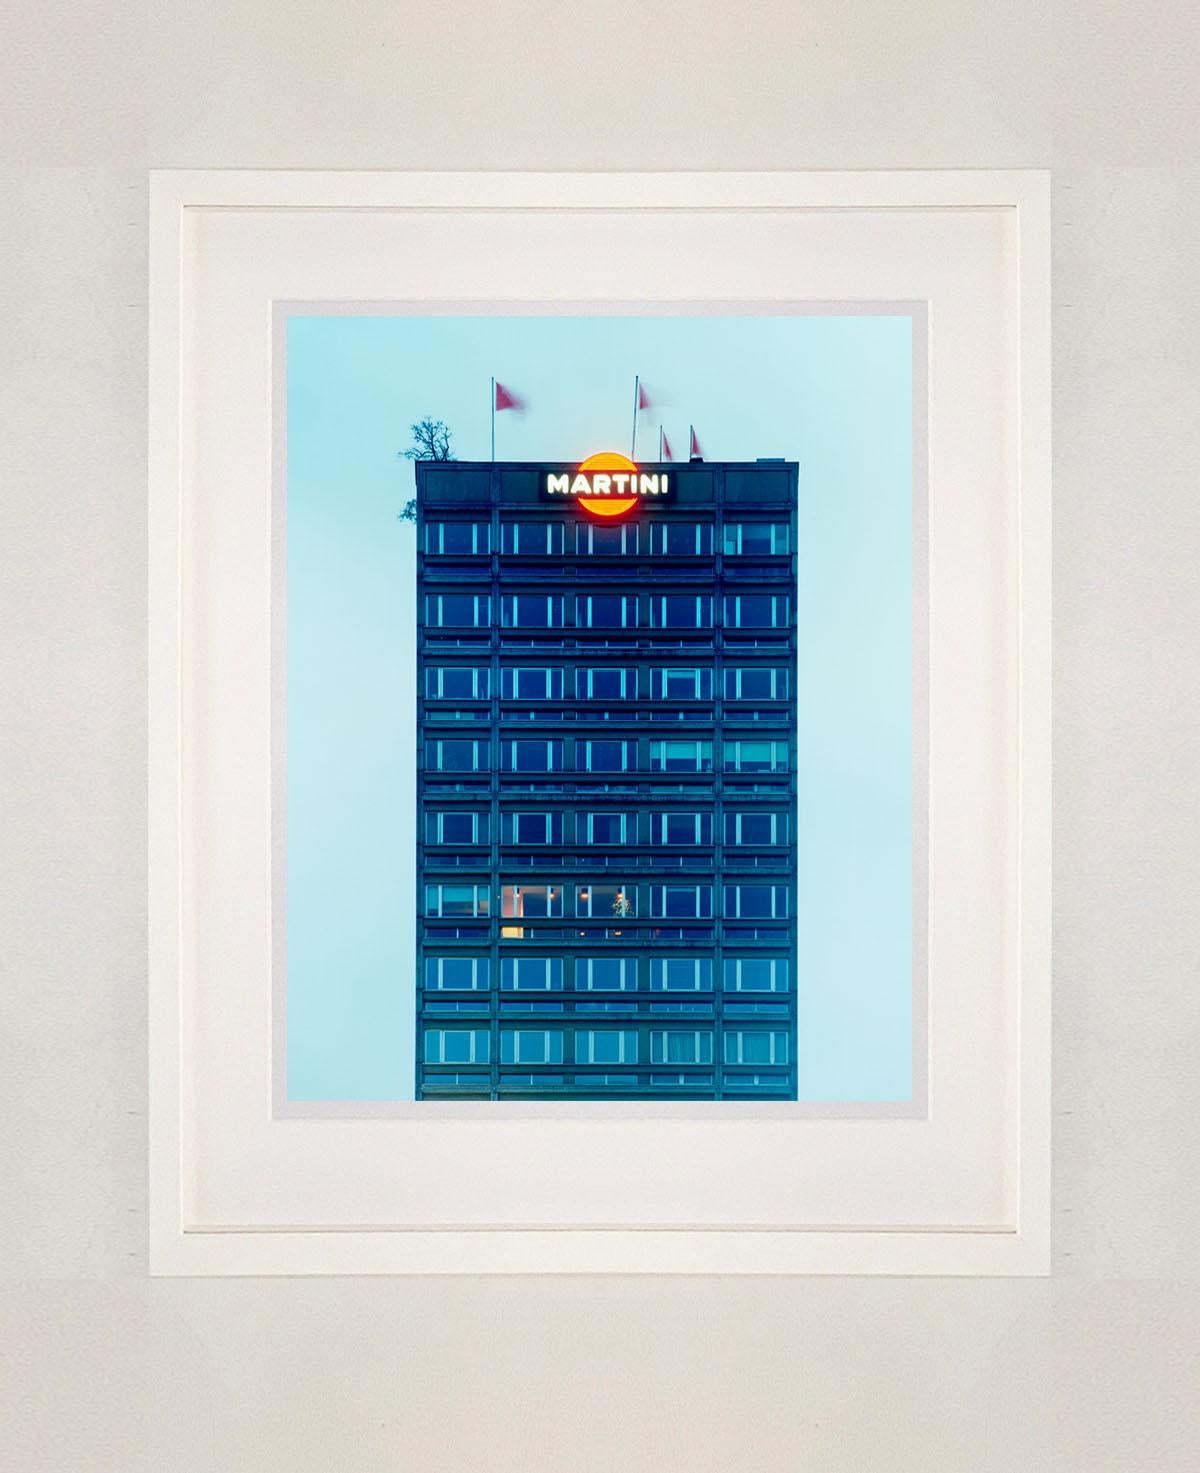 Blue Martini, from Richard Heeps series, 'A Short History of Milan' which began in November 2018 for a special project featuring at the Affordable Art Fair Milan 2019 and the series is ongoing.
There is a reoccurring linear, structural theme